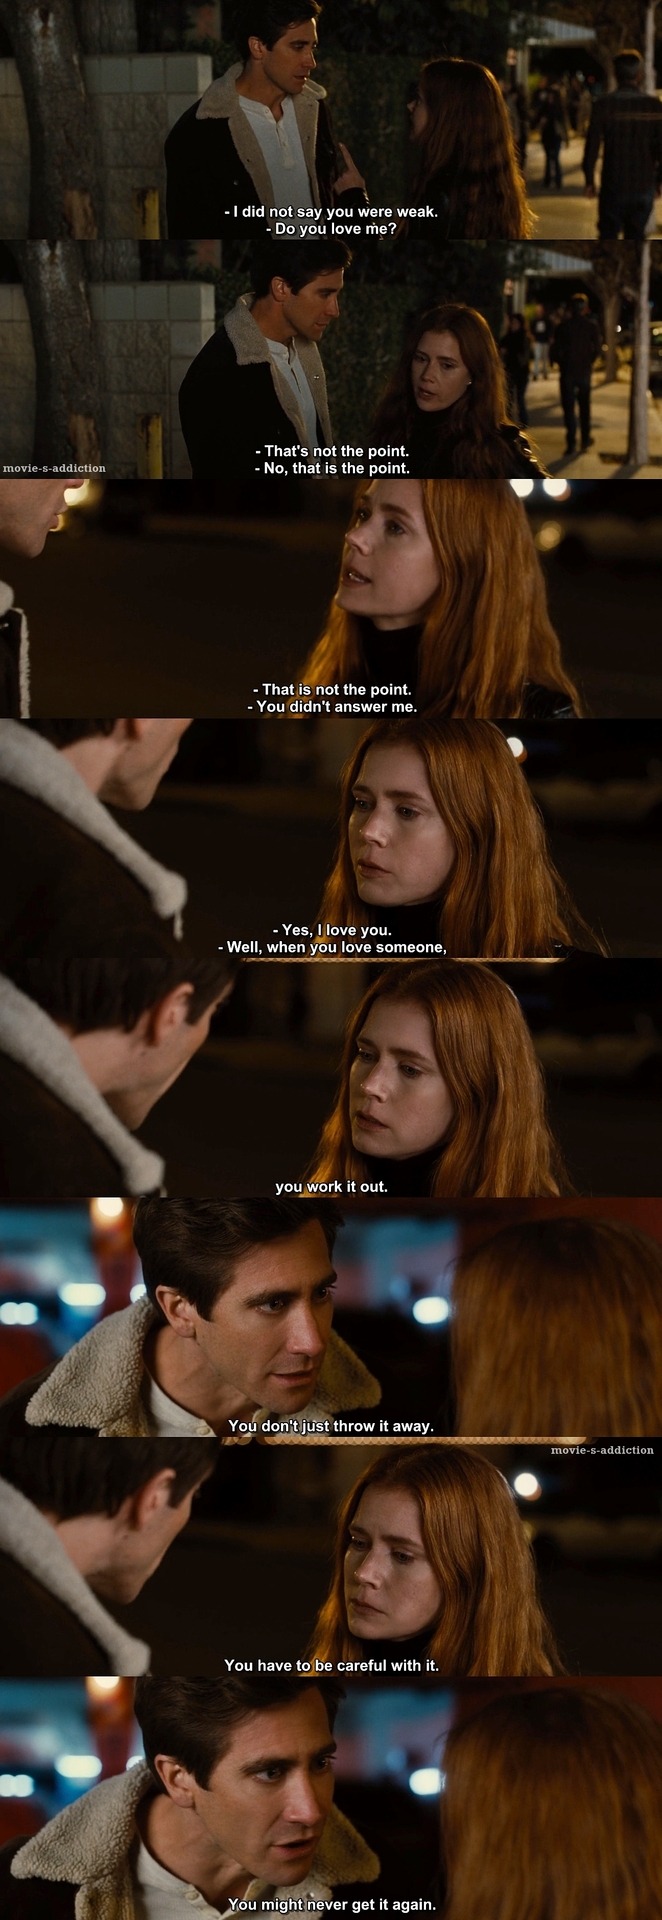 I dont know how it ended up like this — movie-s-addiction: Nocturnal Animals  | 2017 |...